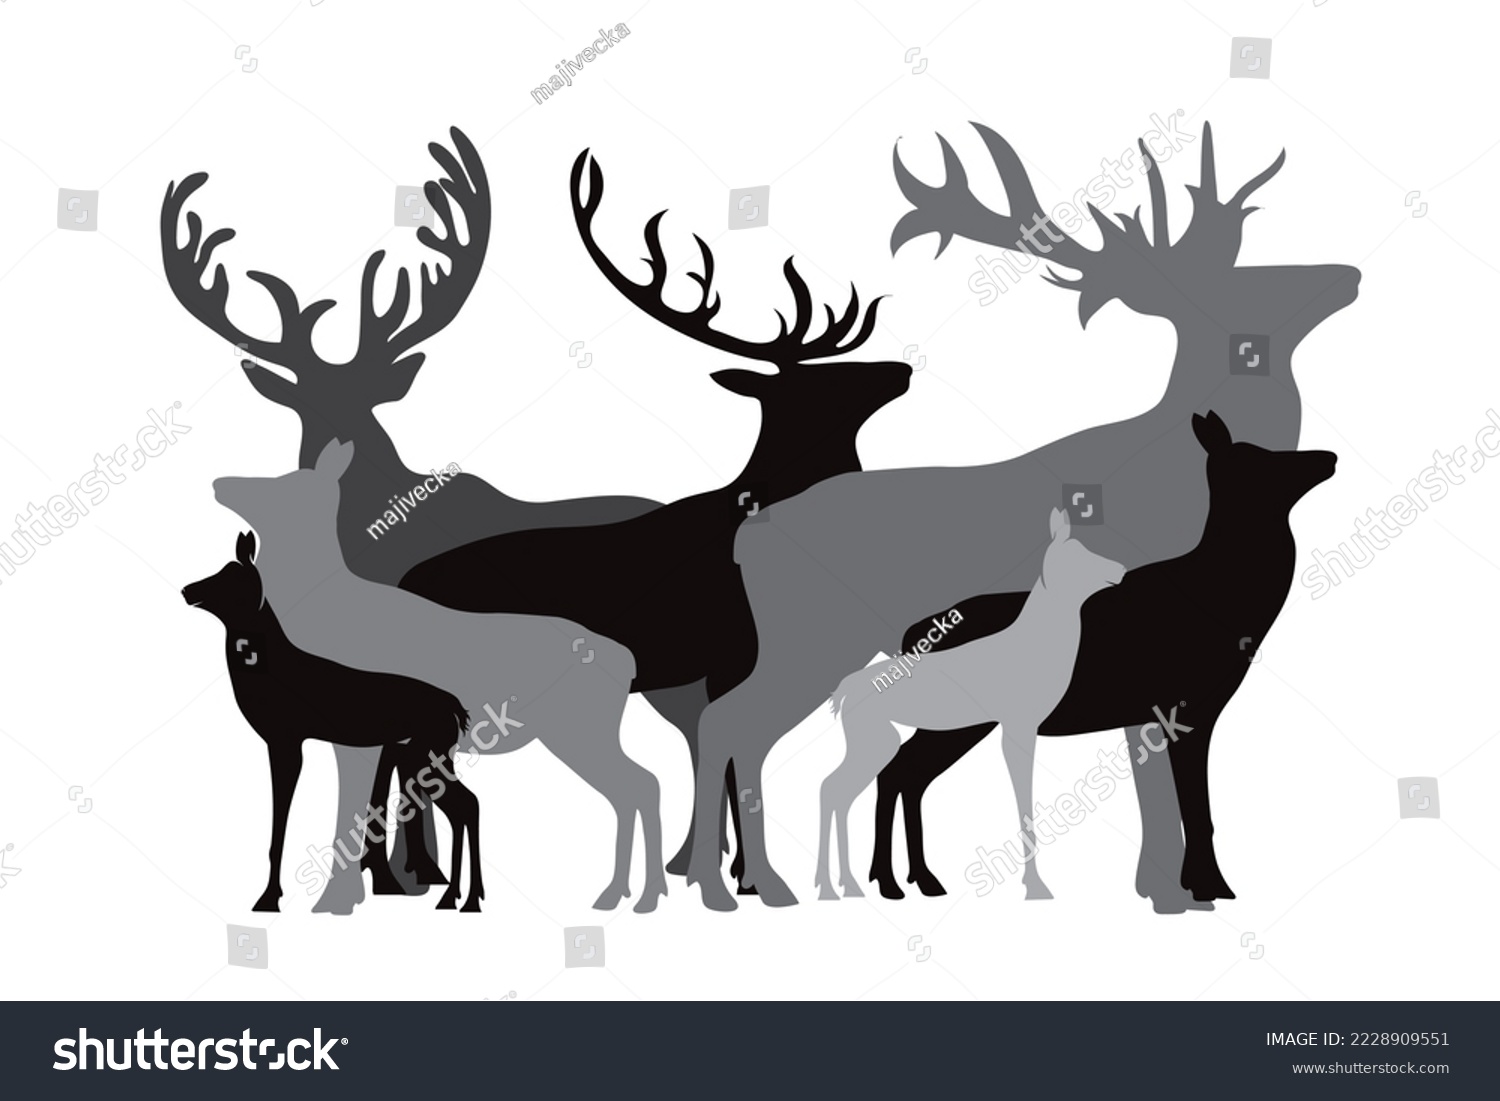 SVG of Silhouette of collection of deers on white background. Symbol of animal and nature. svg